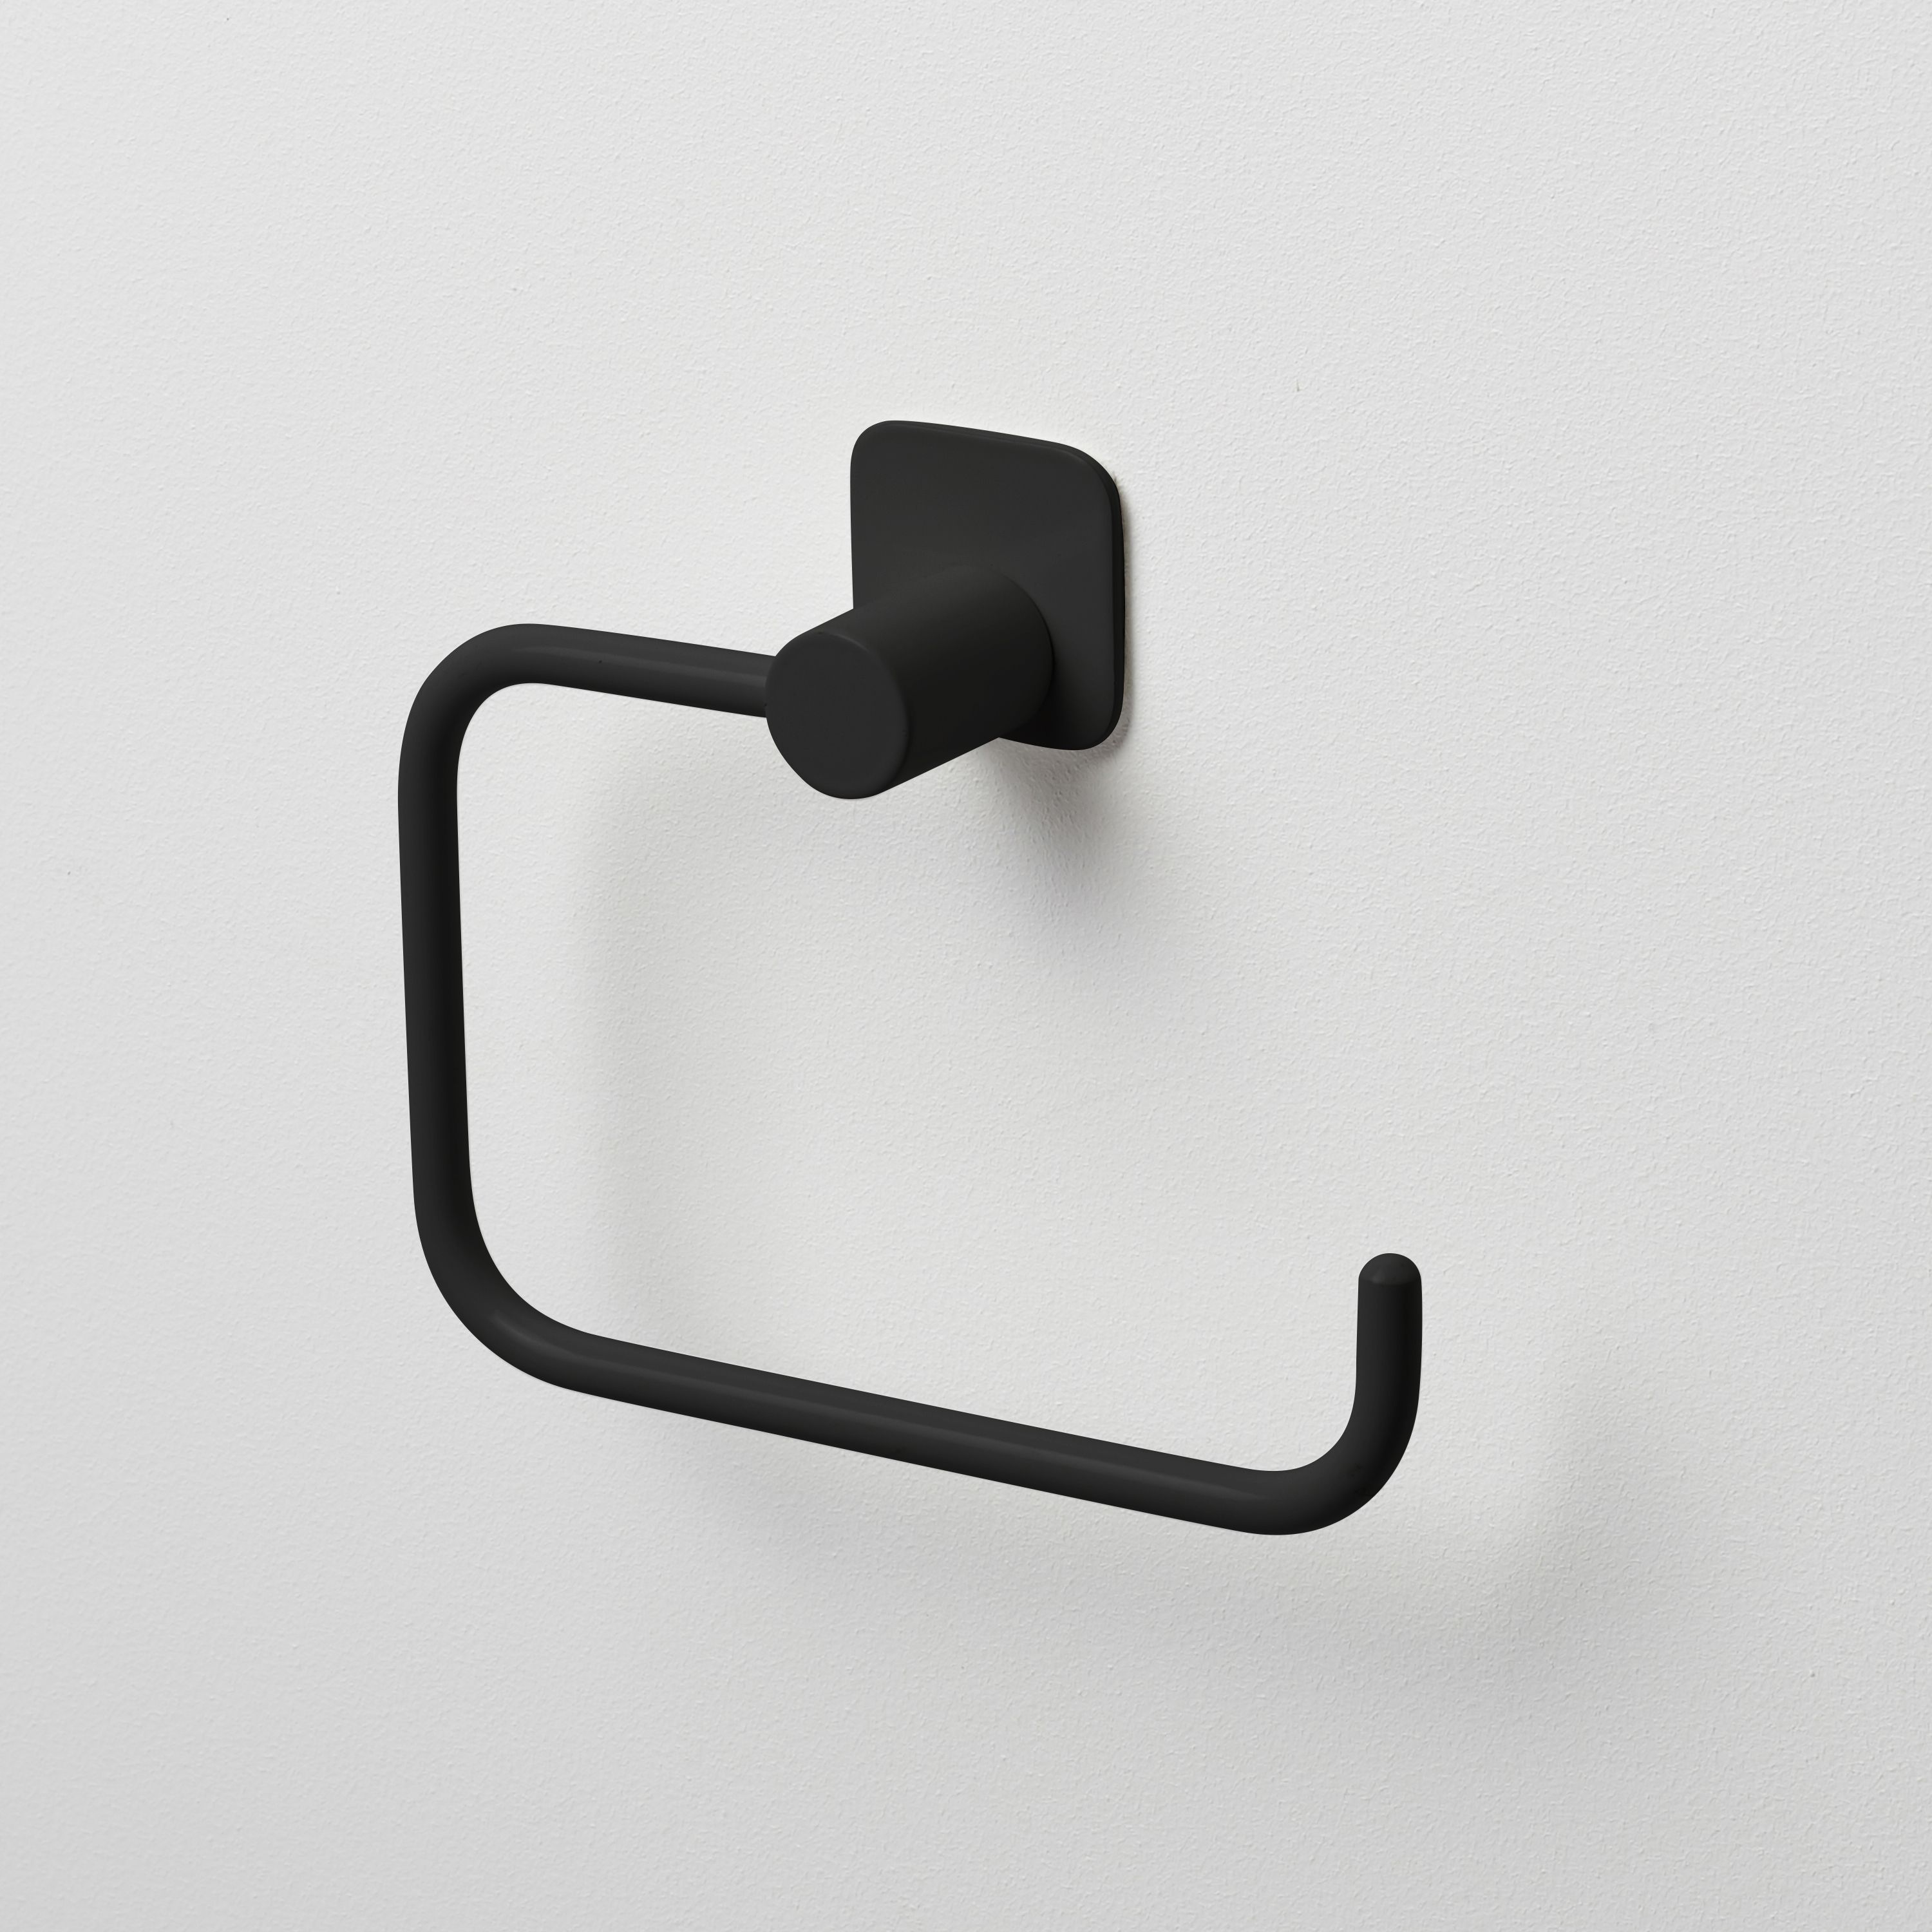 Black Toilet Roll Holder Wall Mounted – The Deco Corner